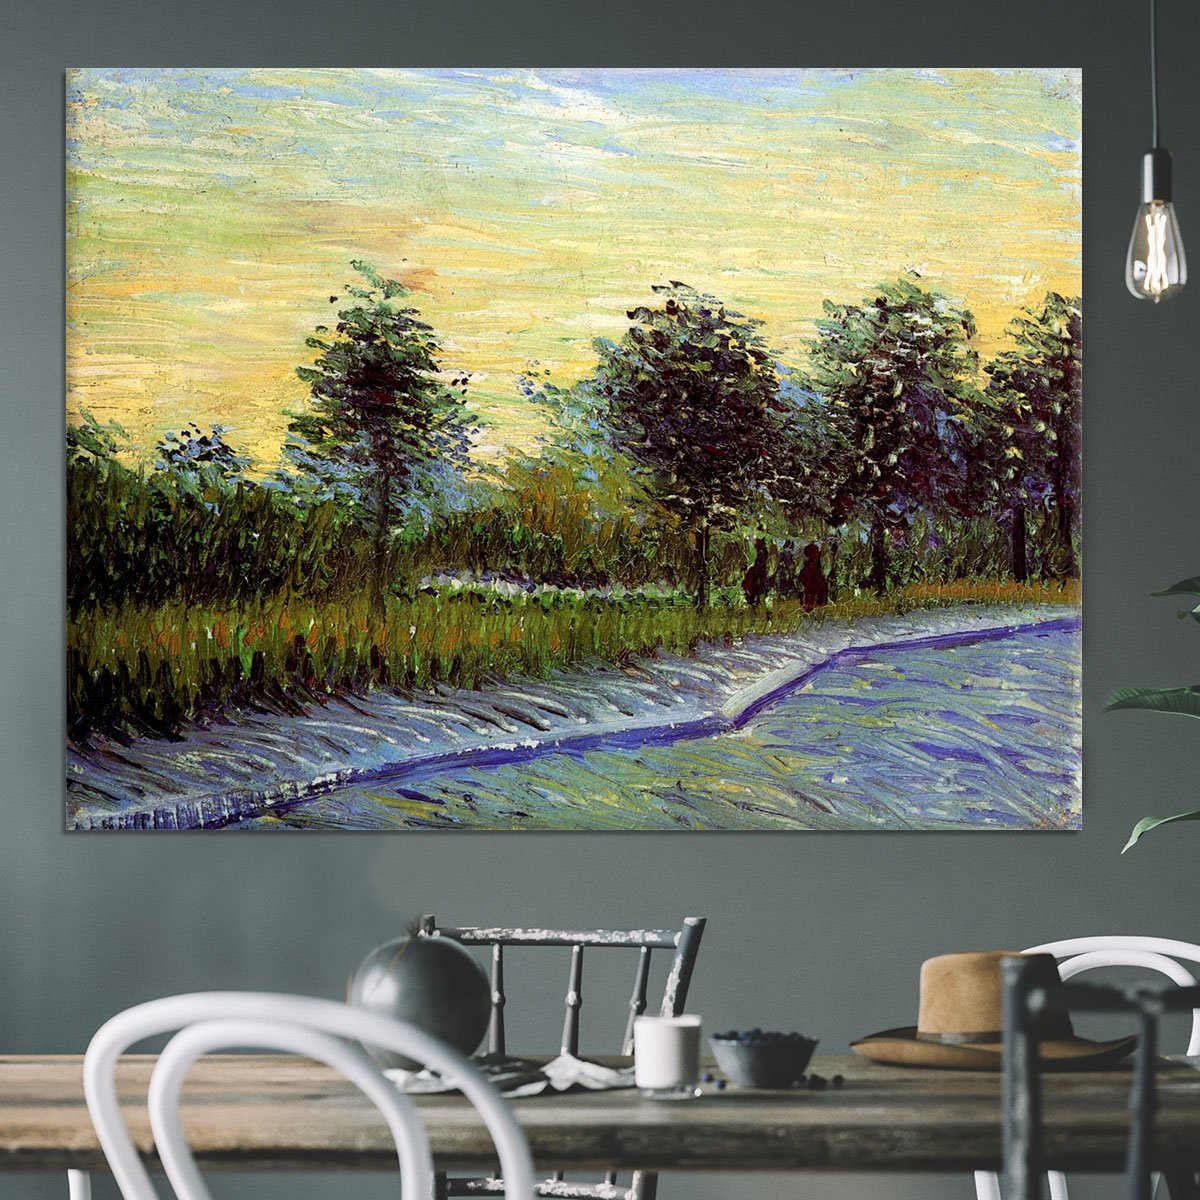 Lane in Voyer d Argenson Park at Asnieres by Van Gogh Canvas Print or Poster